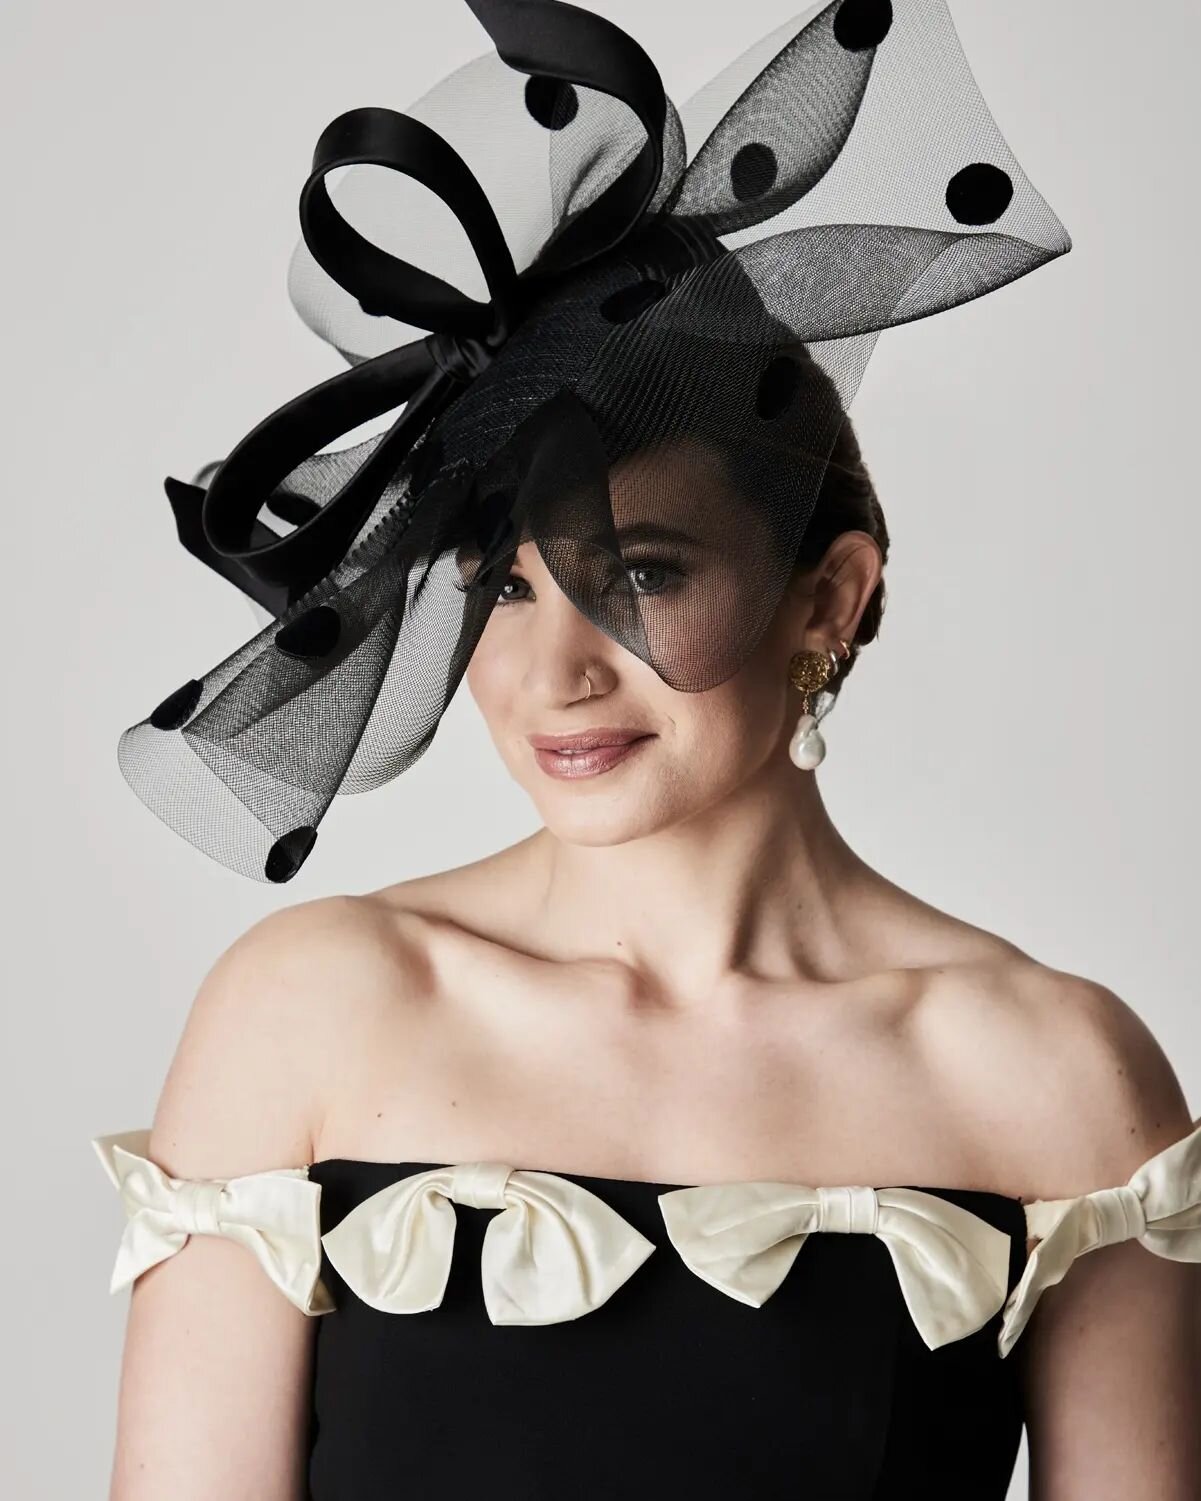 This week saw the launch of a fantastic hat auction supporting @braintumourrsch. 
⭐Link in bio!⭐

Created by 22 members of The British Hat Guild, the haute couture pieces will be auctioned to raise funds for Brain Tumour Research. The hats have been 